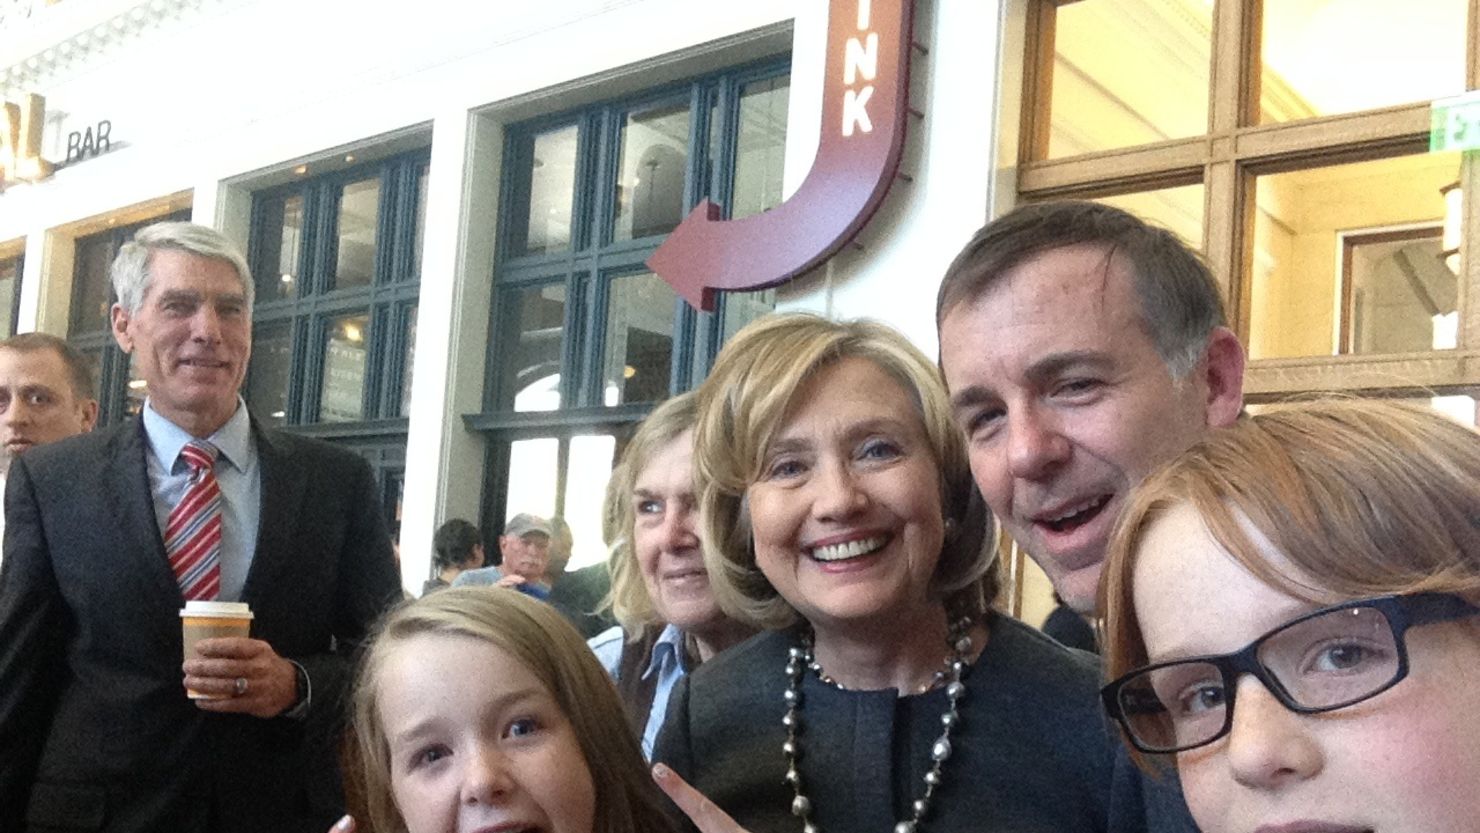 Macy Friday, flashing peace signs, poses with (right to left) her 12-year old brother Finn, her father Derek, Hillary Clinton and her grandmother Elaine. Sen. Mark Udall photobombs on the left.